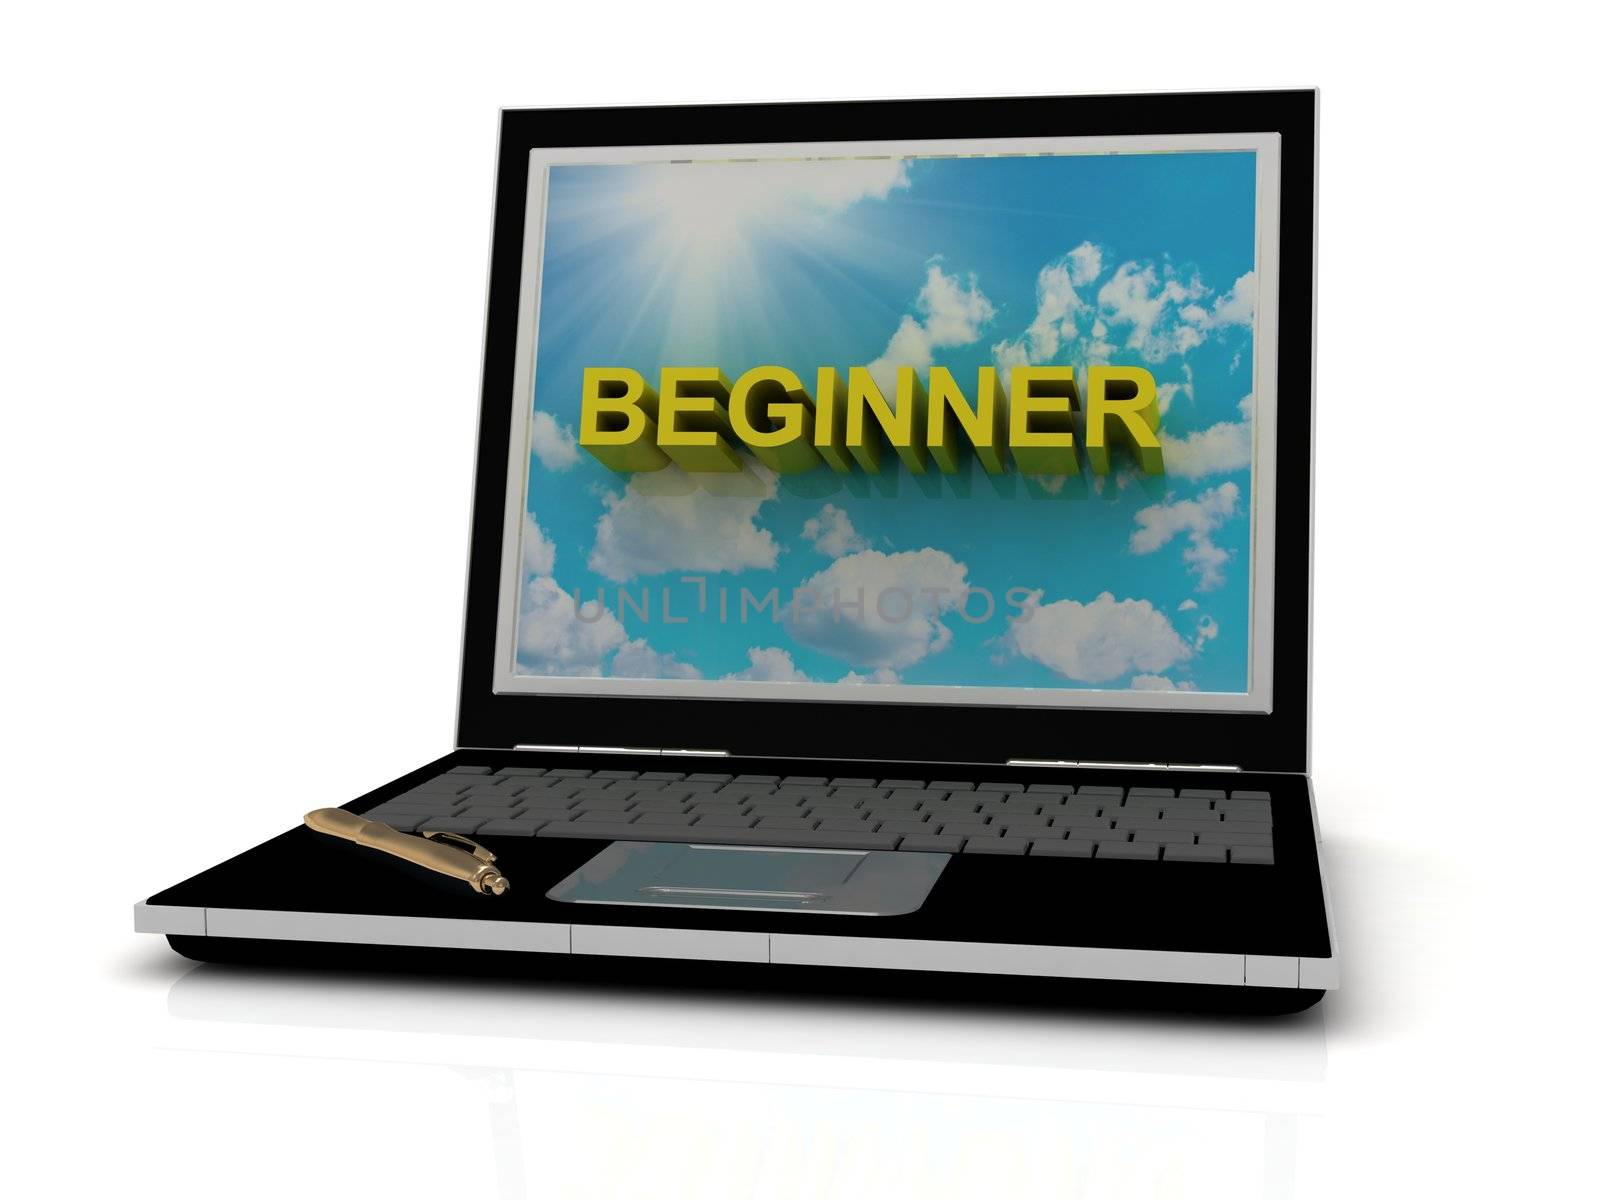 BEGINNER sign on laptop screen by GreenMost